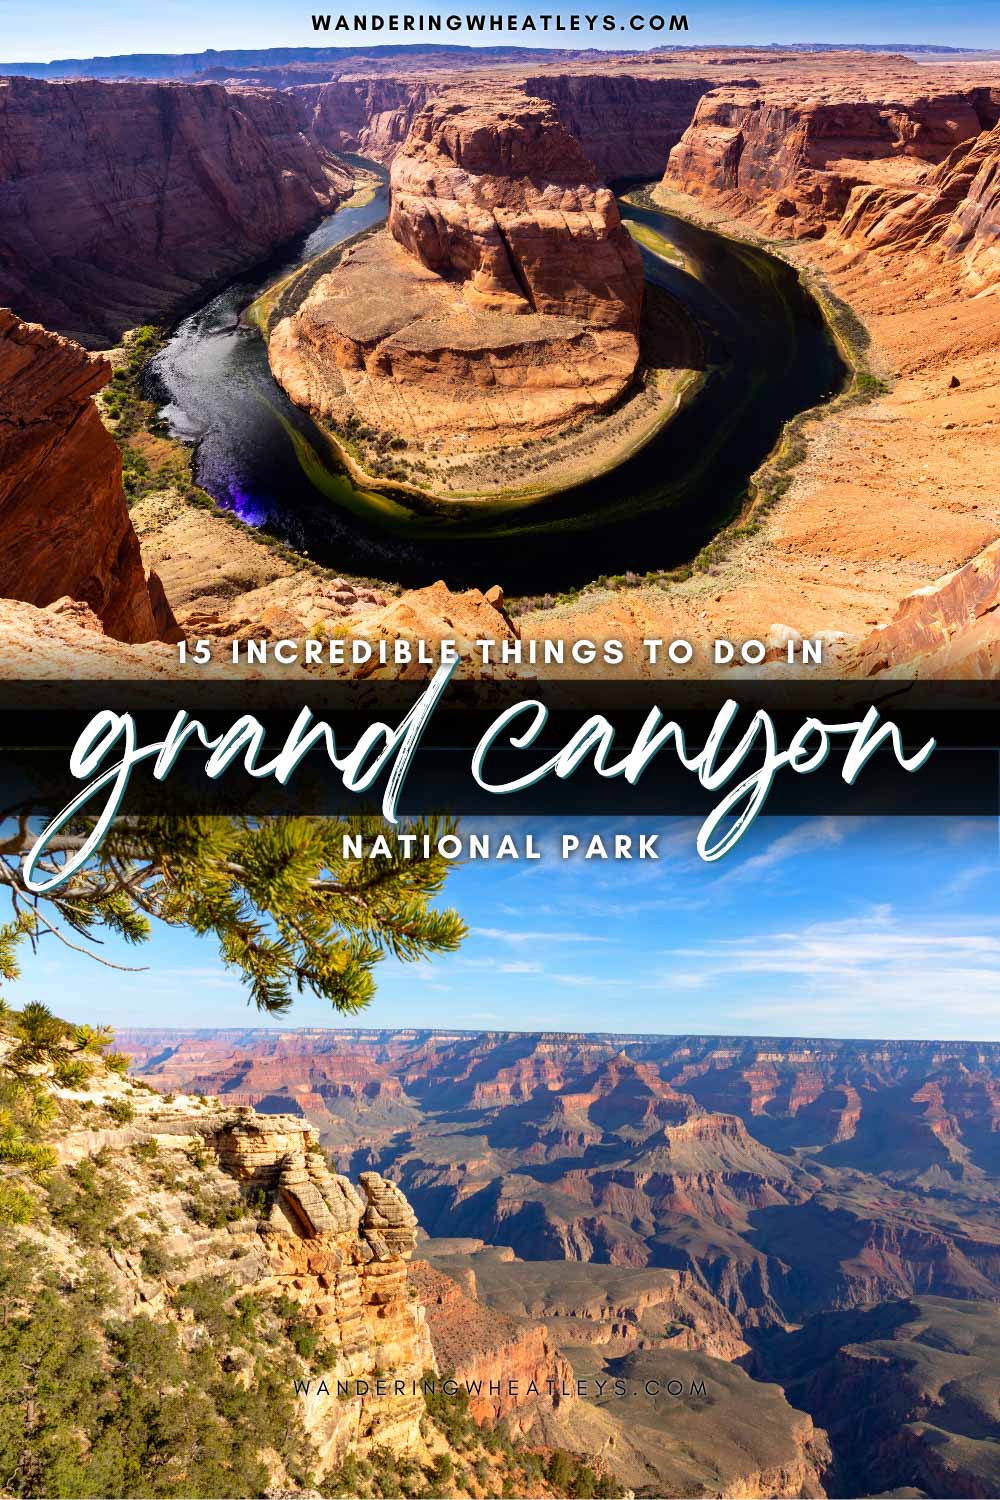 The Best Things to do in Grand Canyon National Park